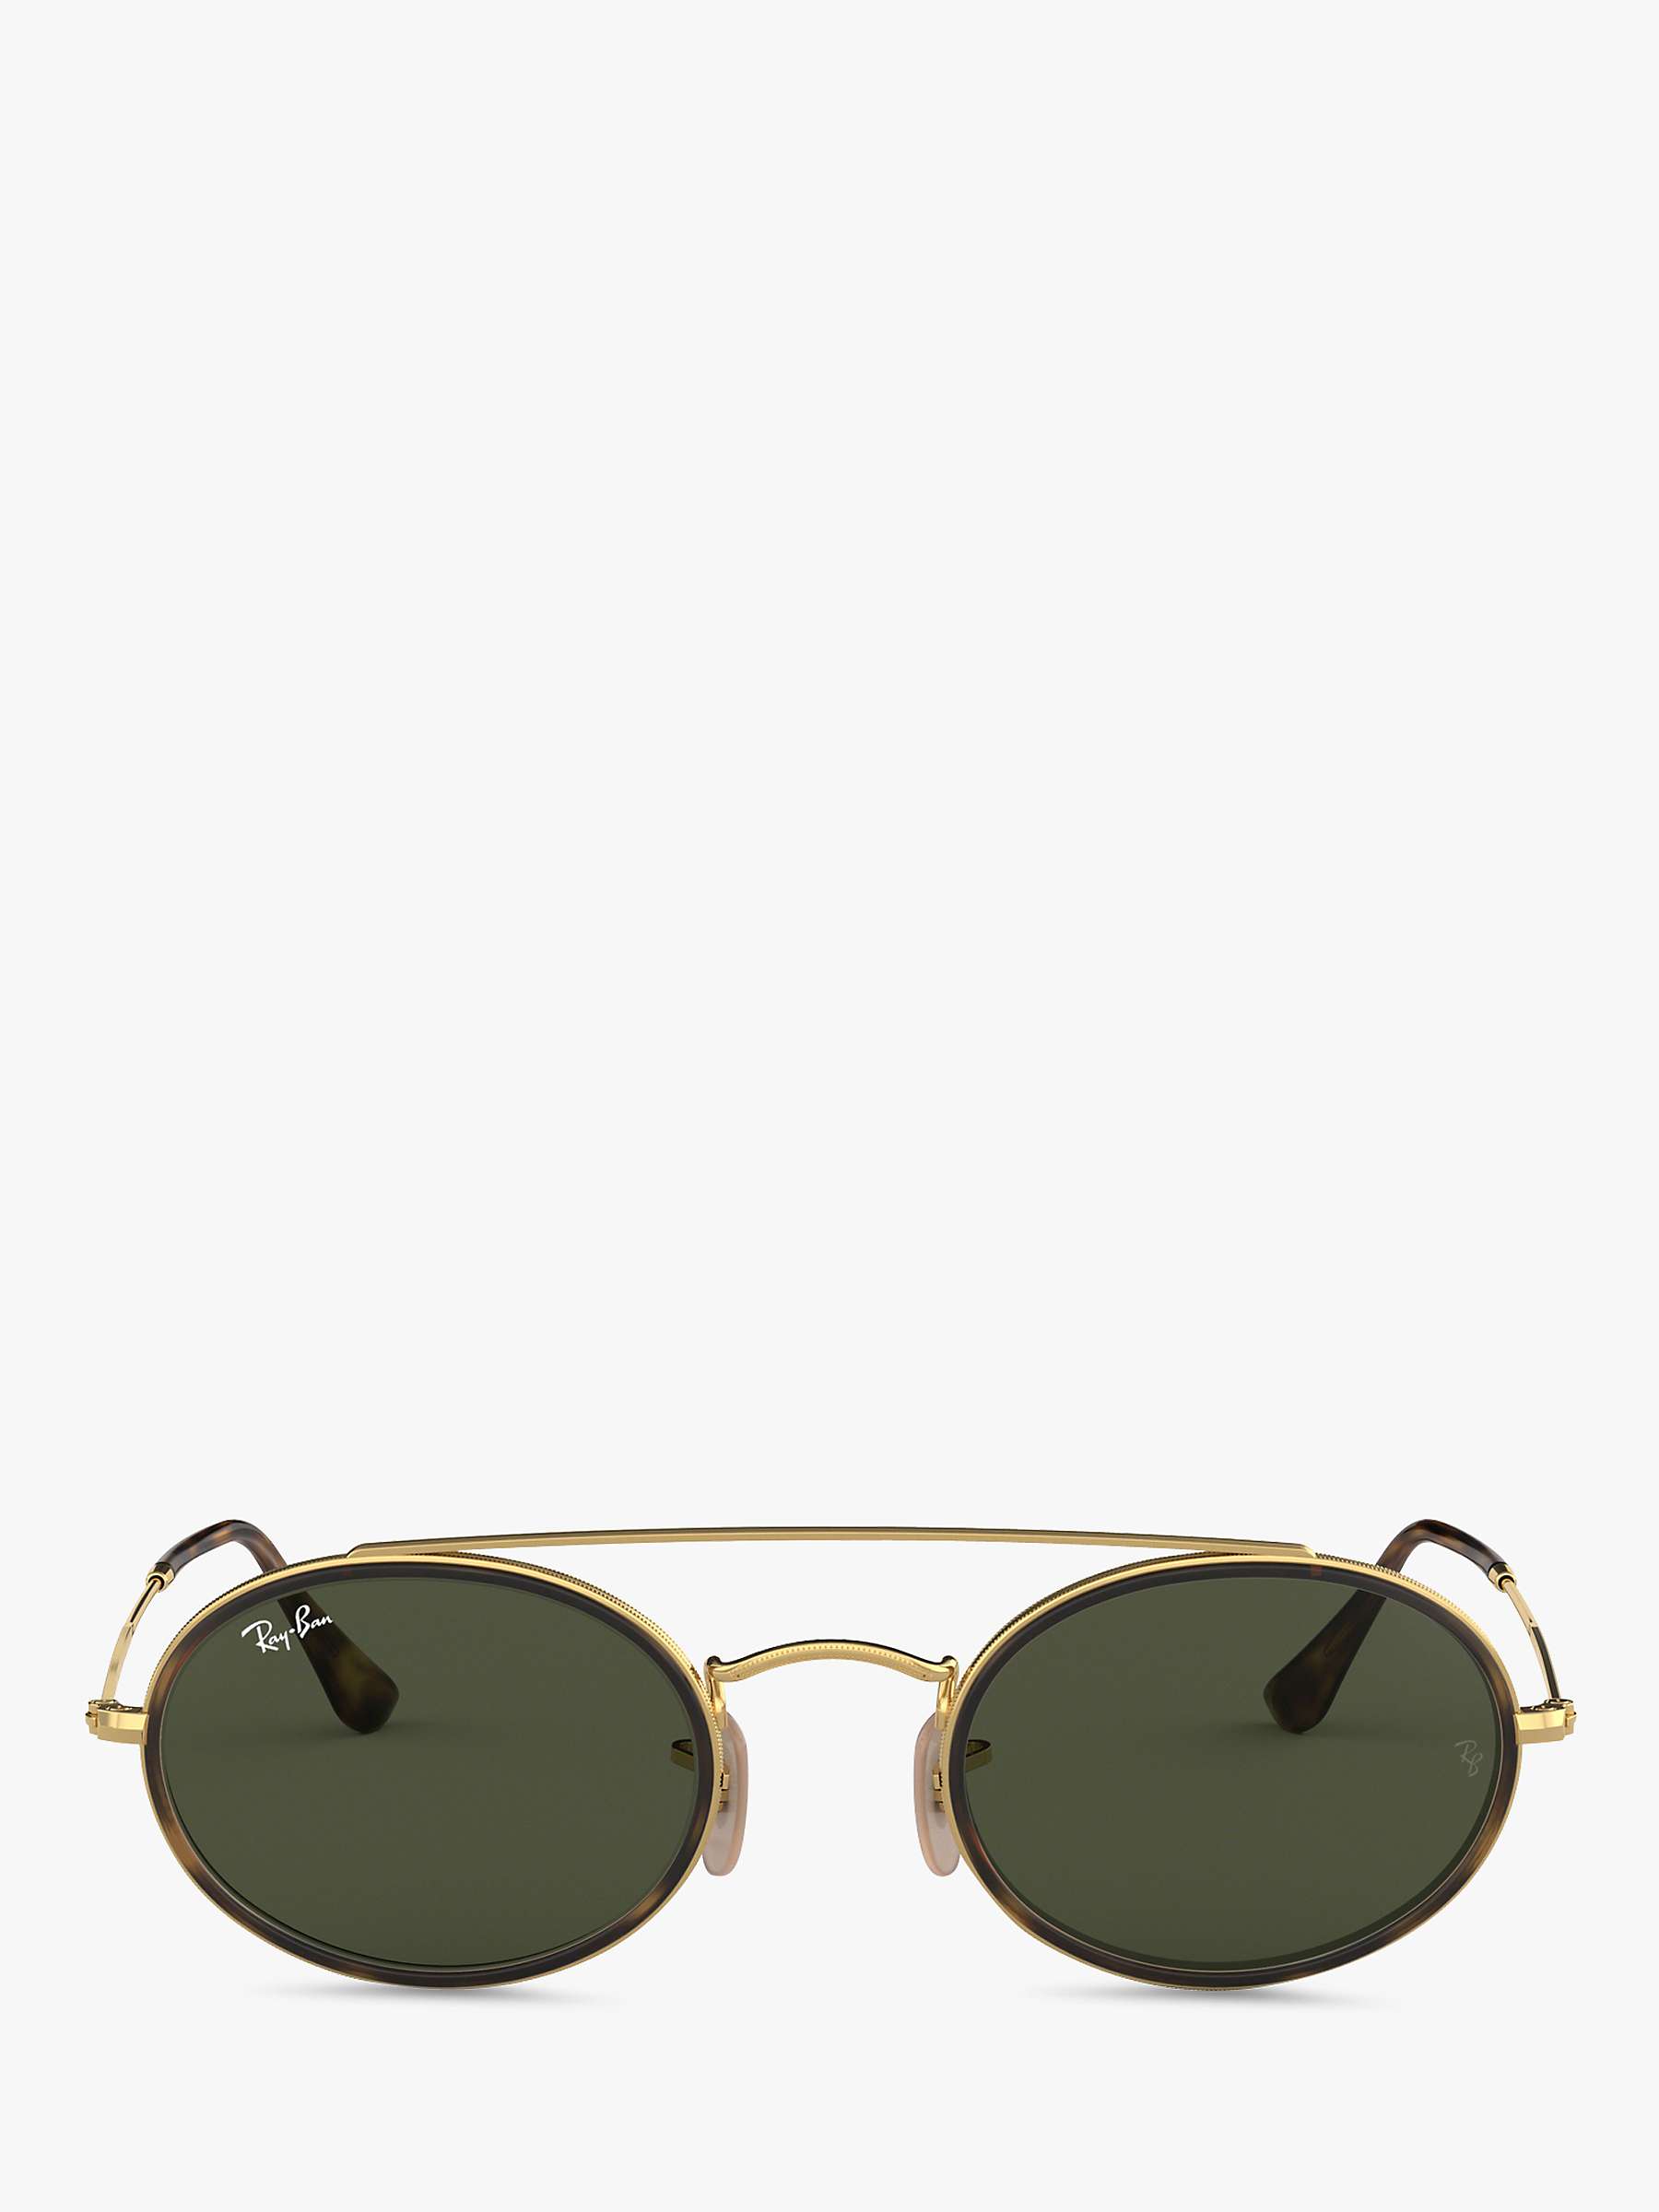 Buy Ray-Ban RB3847N Women's Oval Sunglasses Online at johnlewis.com